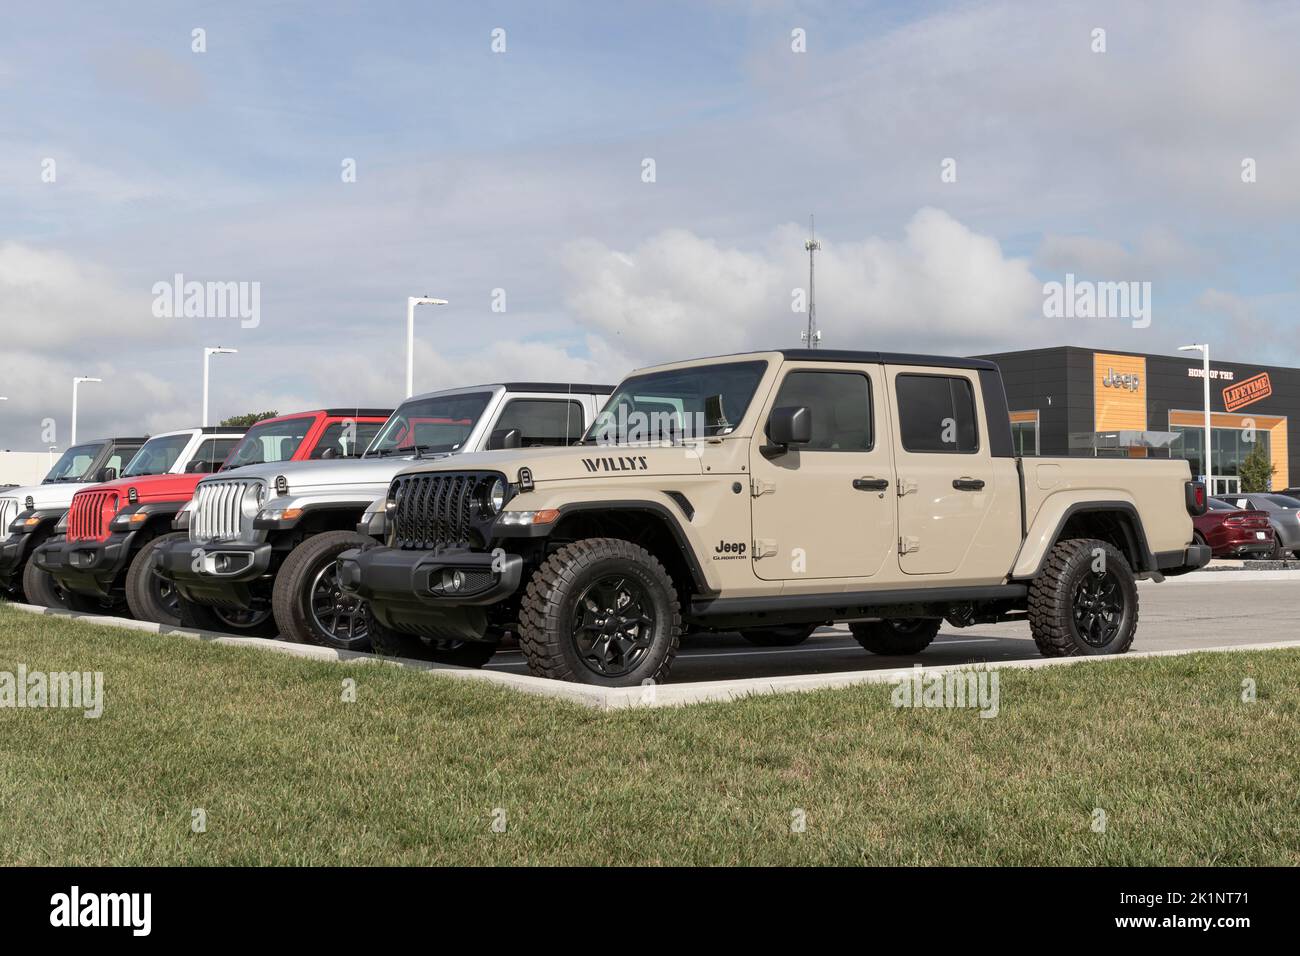 Tipton - Circa September 2022: Jeep Gladiator display at a Stellantis dealer. The Jeep Gladiator models include the Sport, Willys, Rubicon and Mojave. Stock Photo